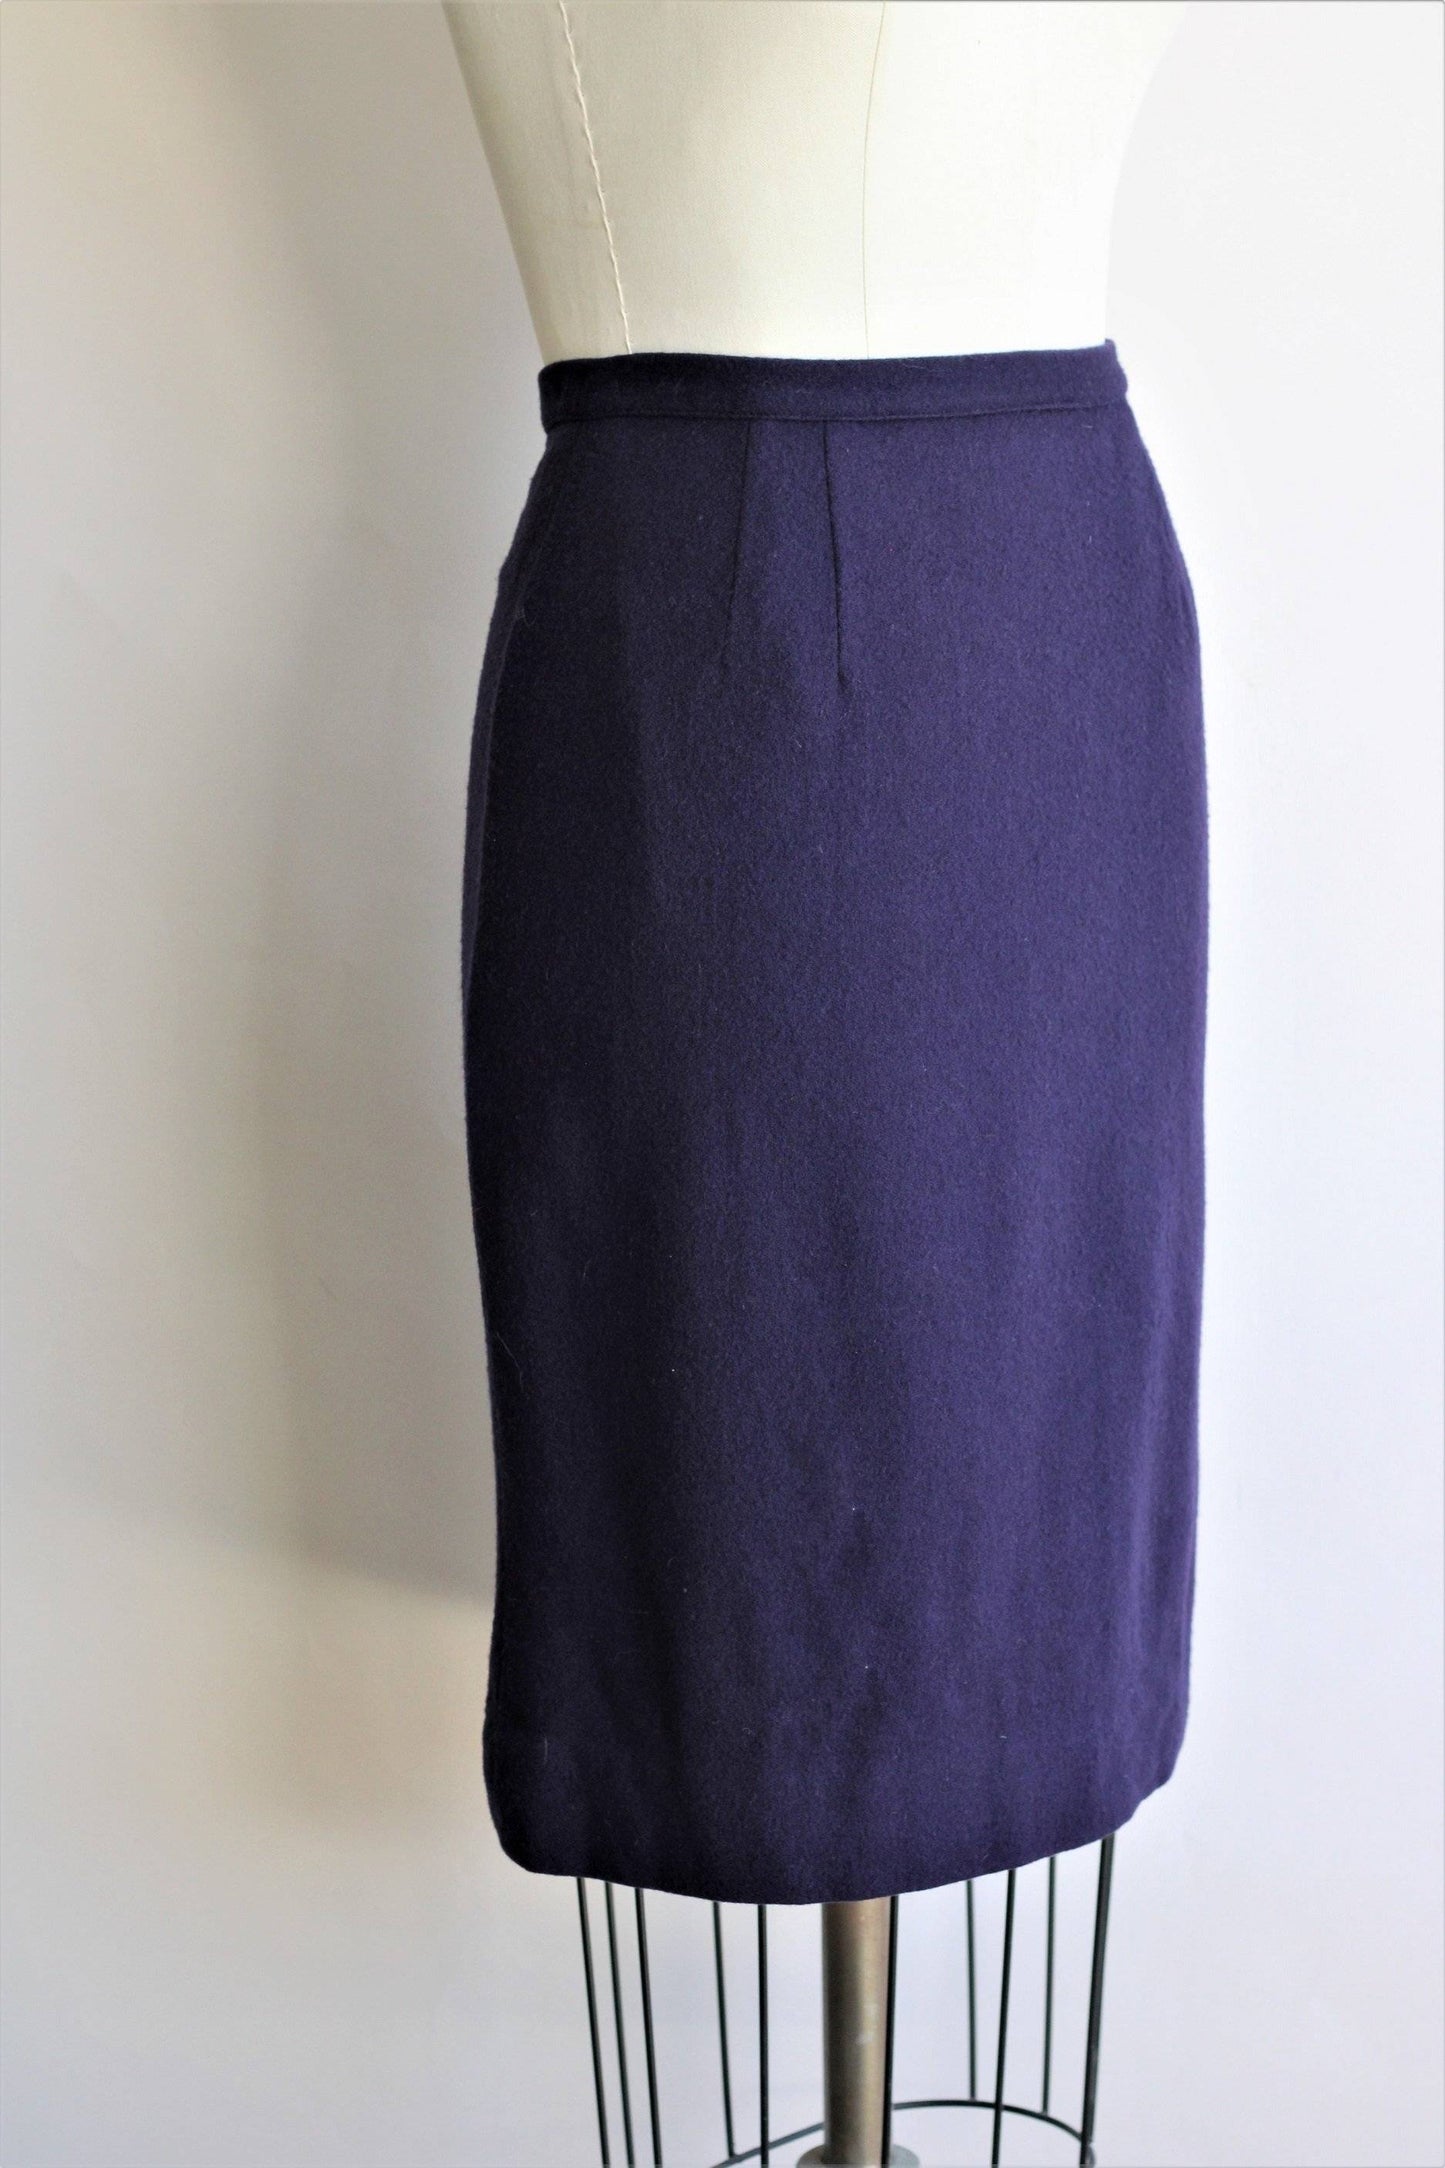 Vintage 1960s Navy Blue Wool Skirt, Campus Casuals-Toadstool Farm Vintage-1960s,1960s 1950s,campus casuals,navy blue,pencil skirt,skirt,Vintage,Vintage Clothing,wiggle